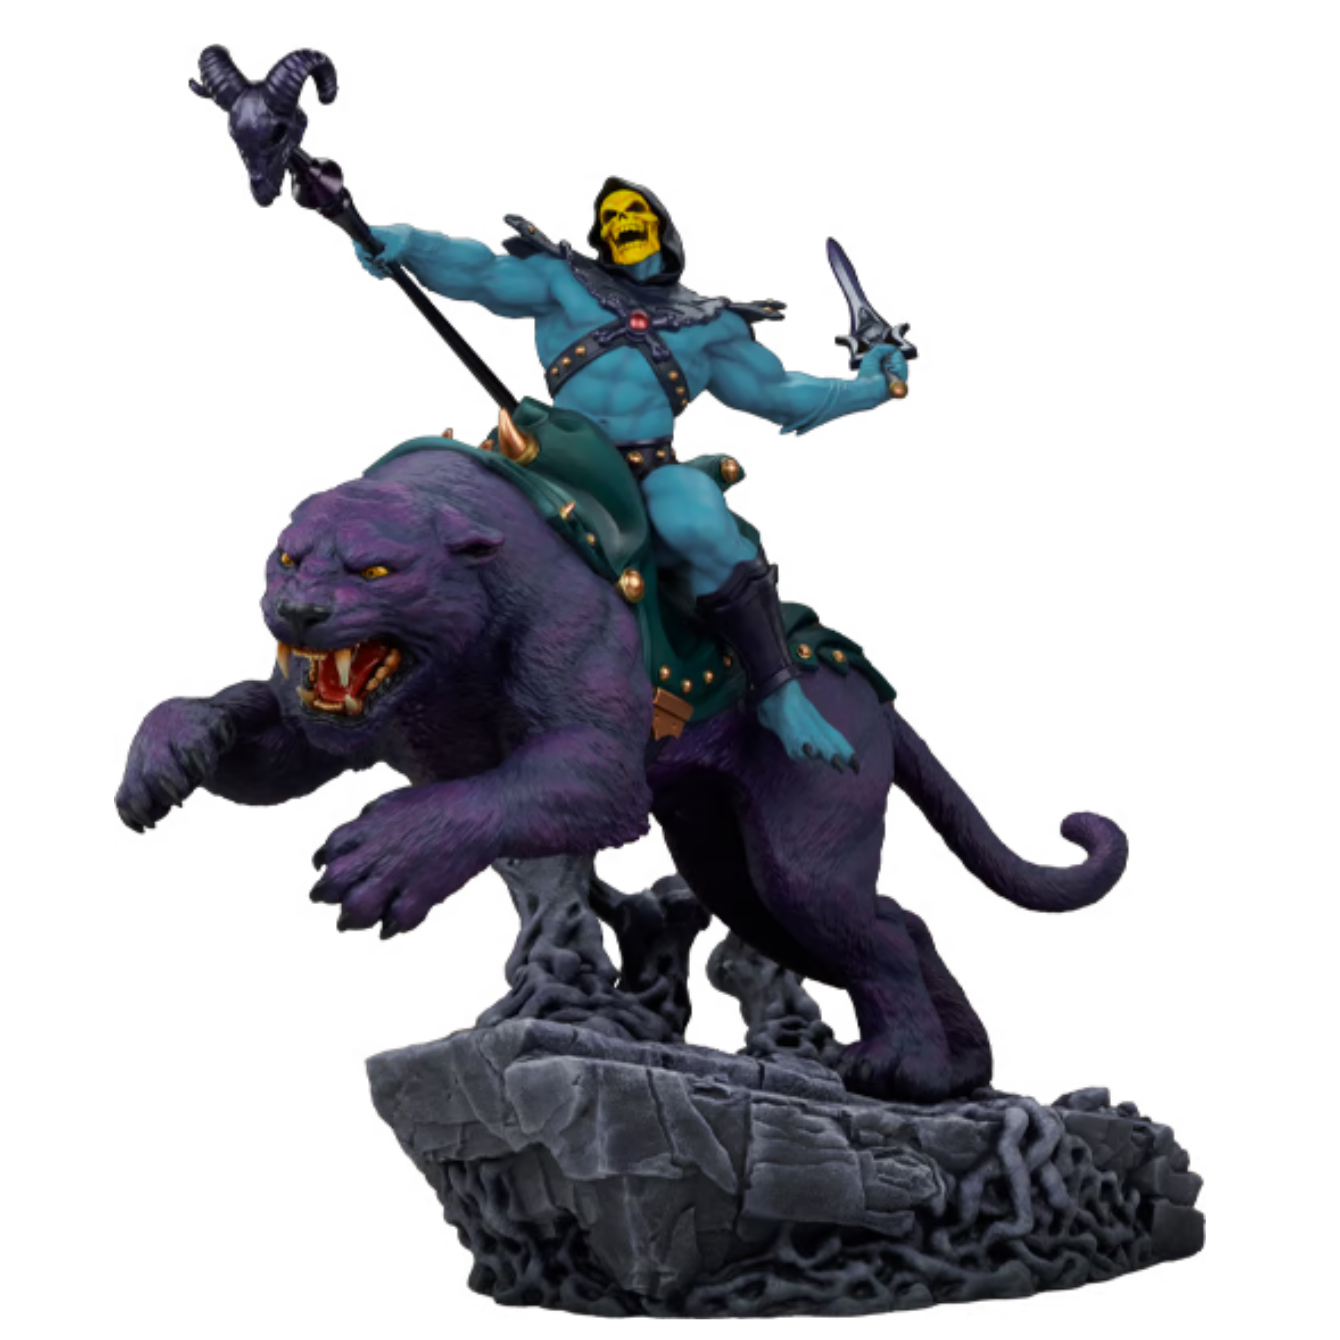 PRE-ORDER SKELETOR & PANTHOR CLASSIC DELUXE